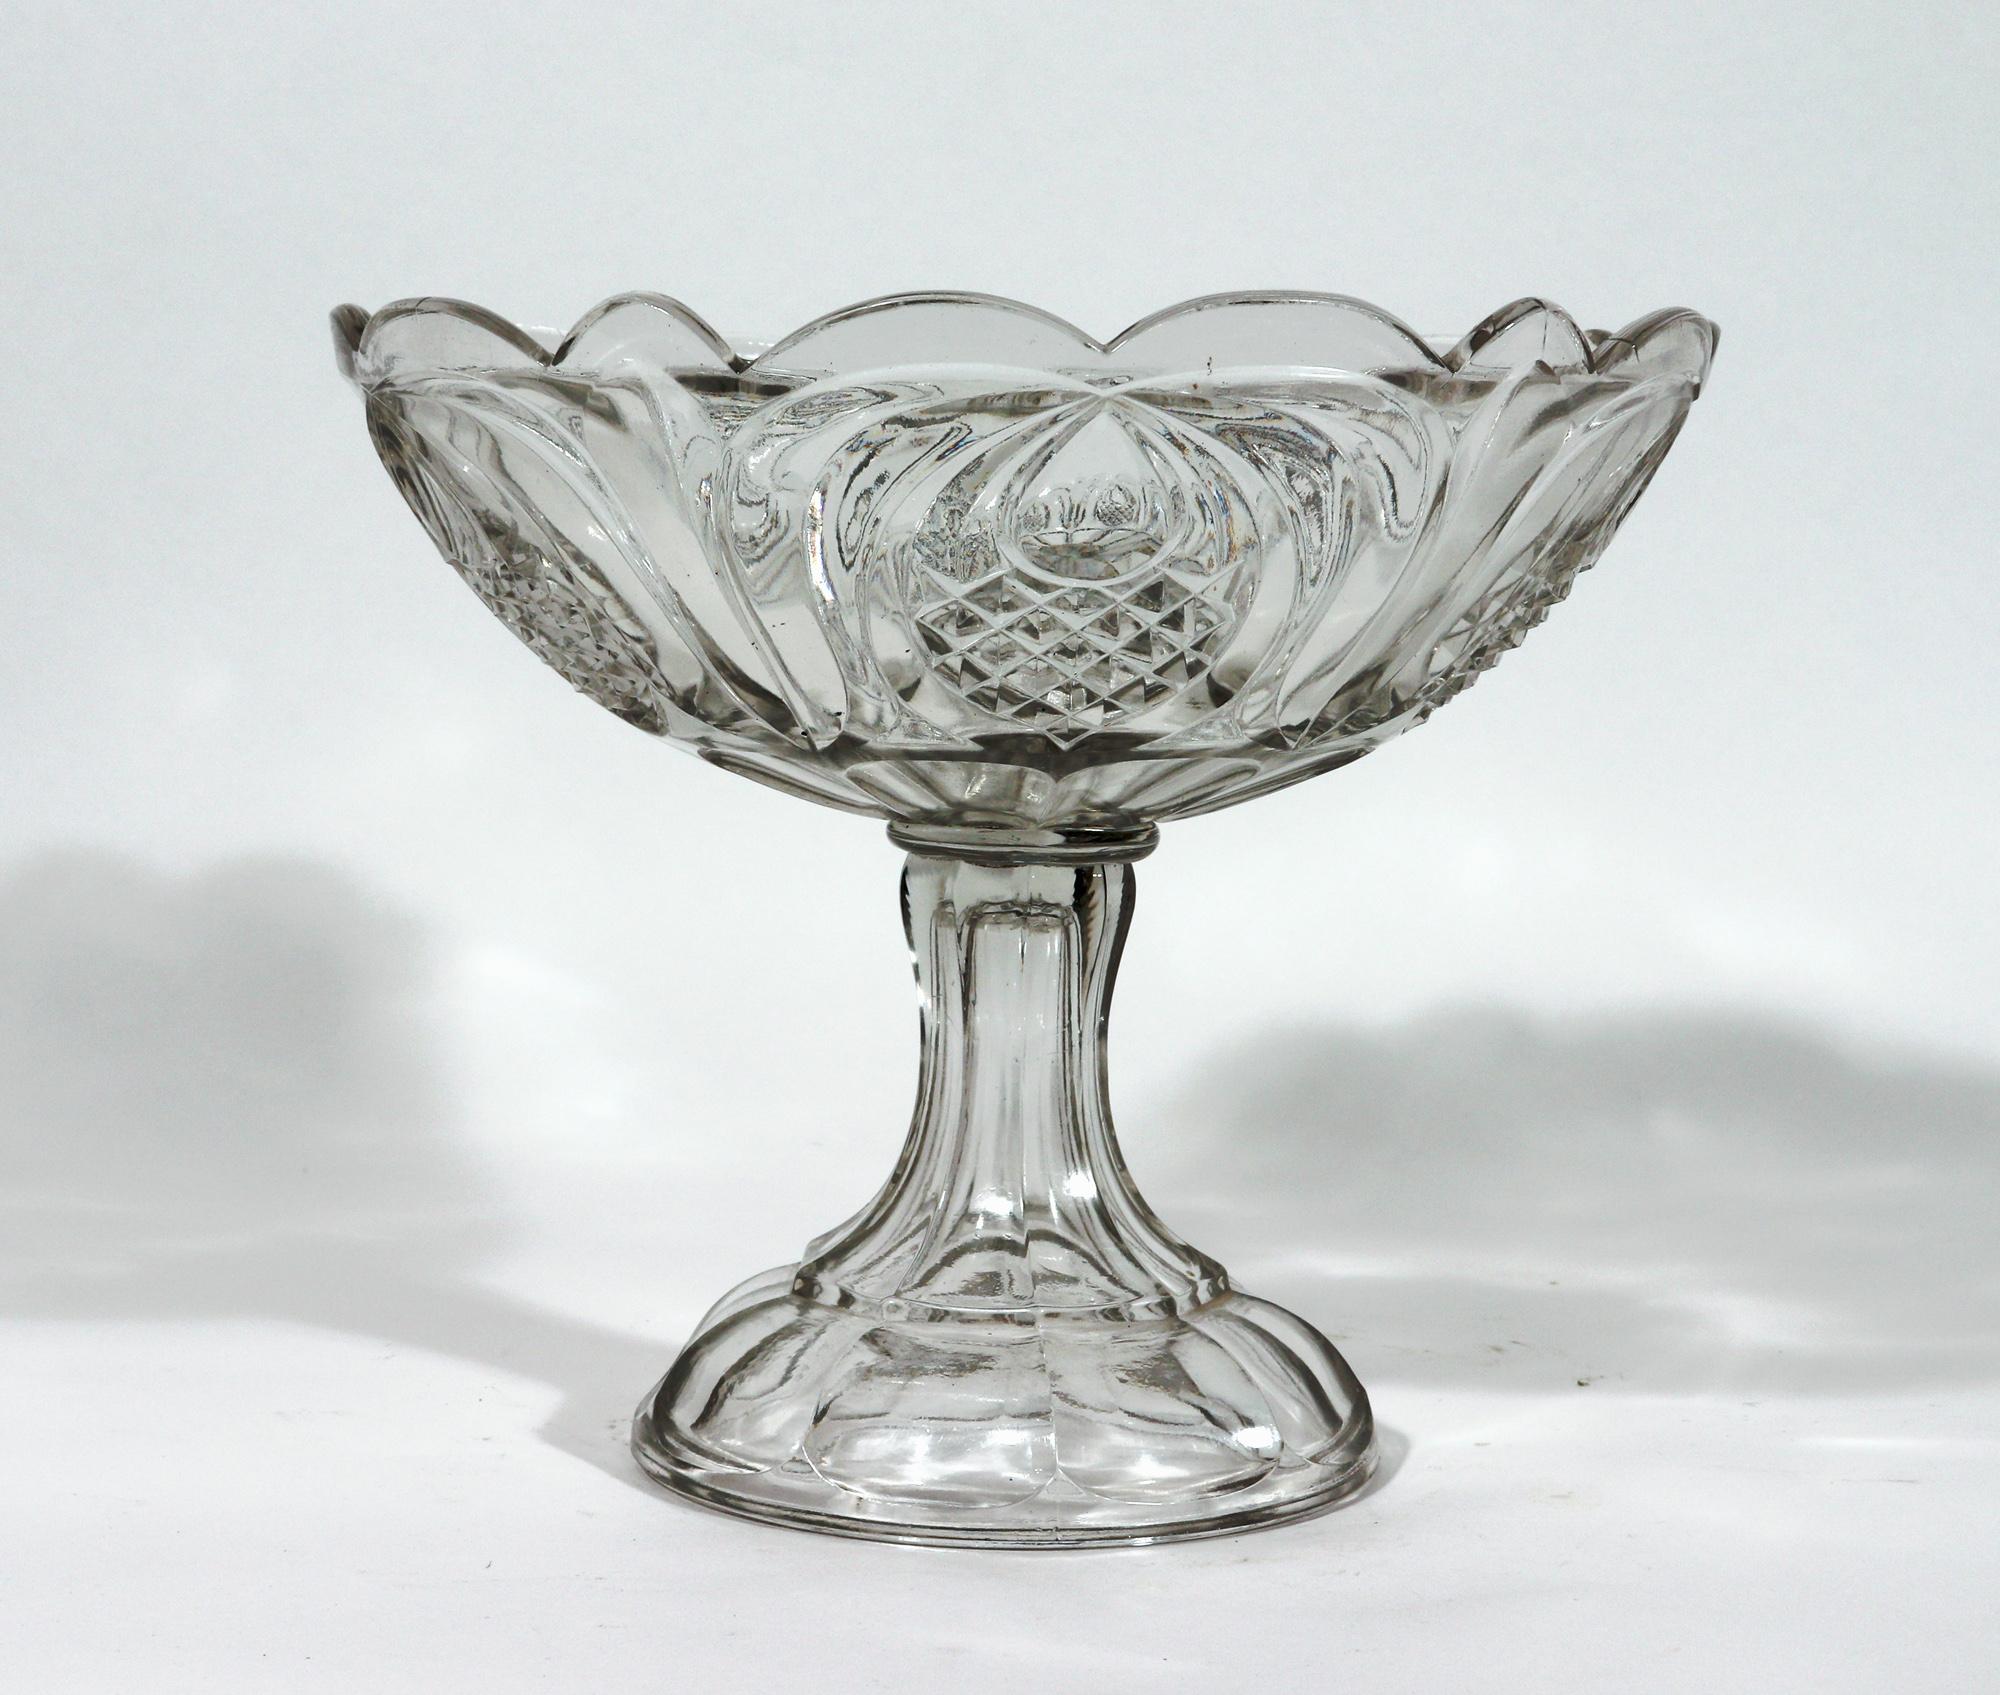 Victorian Boston & Sandwich American Pressed Glass Compote with Pineapple Pattern For Sale